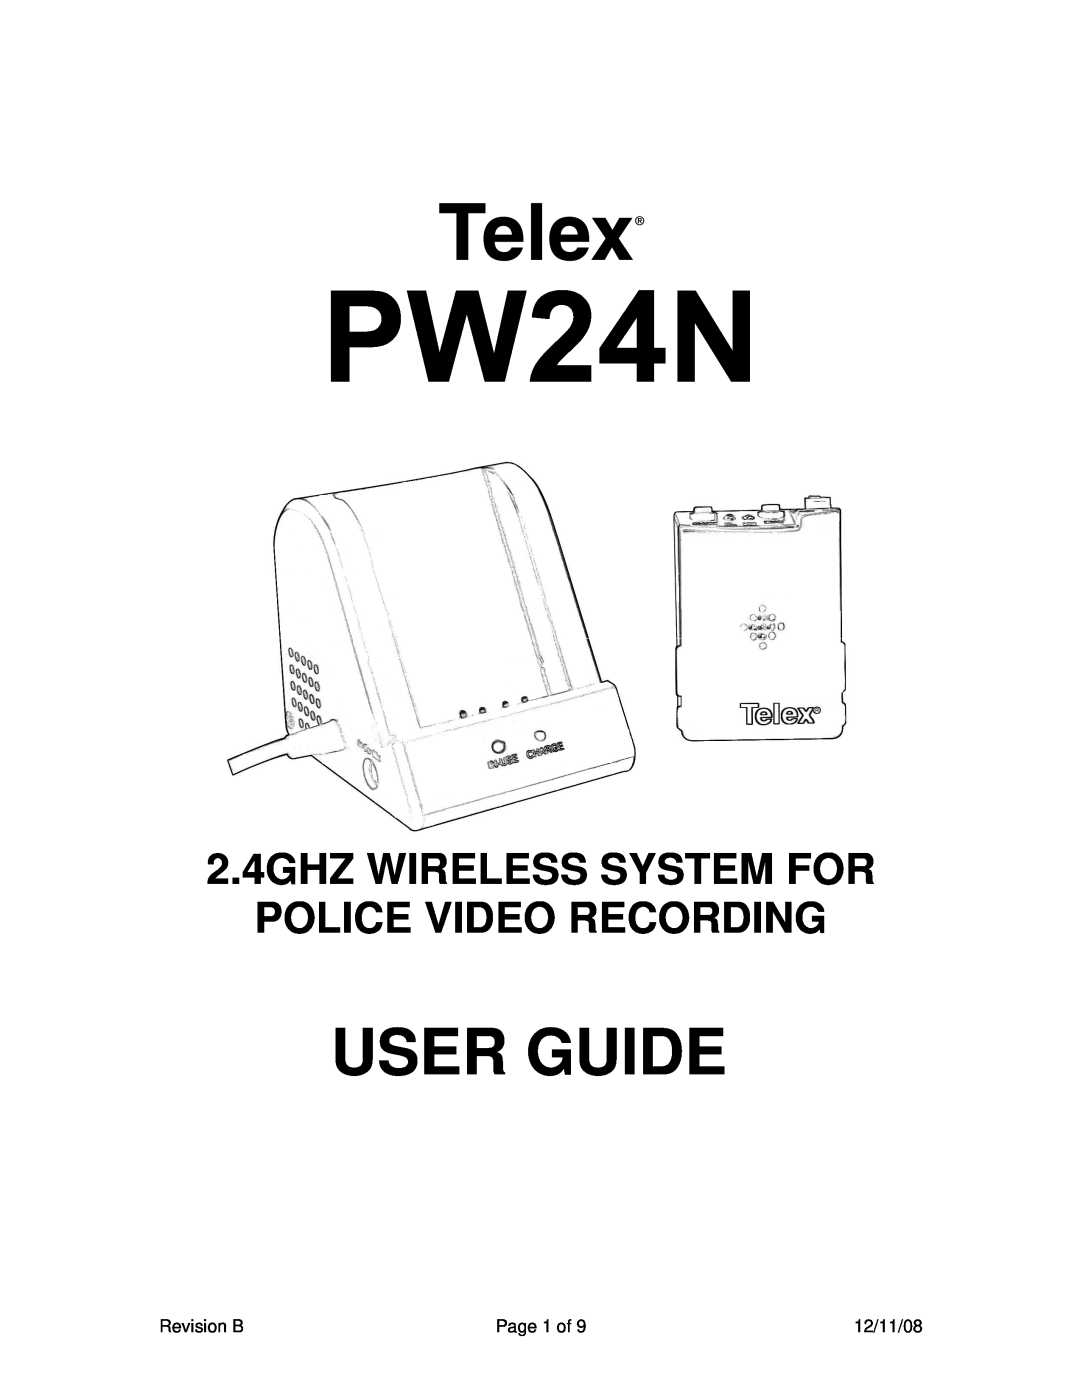 Telex PW24N manual User Guide, 2.4GHZ WIRELESS SYSTEM FOR POLICE VIDEO RECORDING 